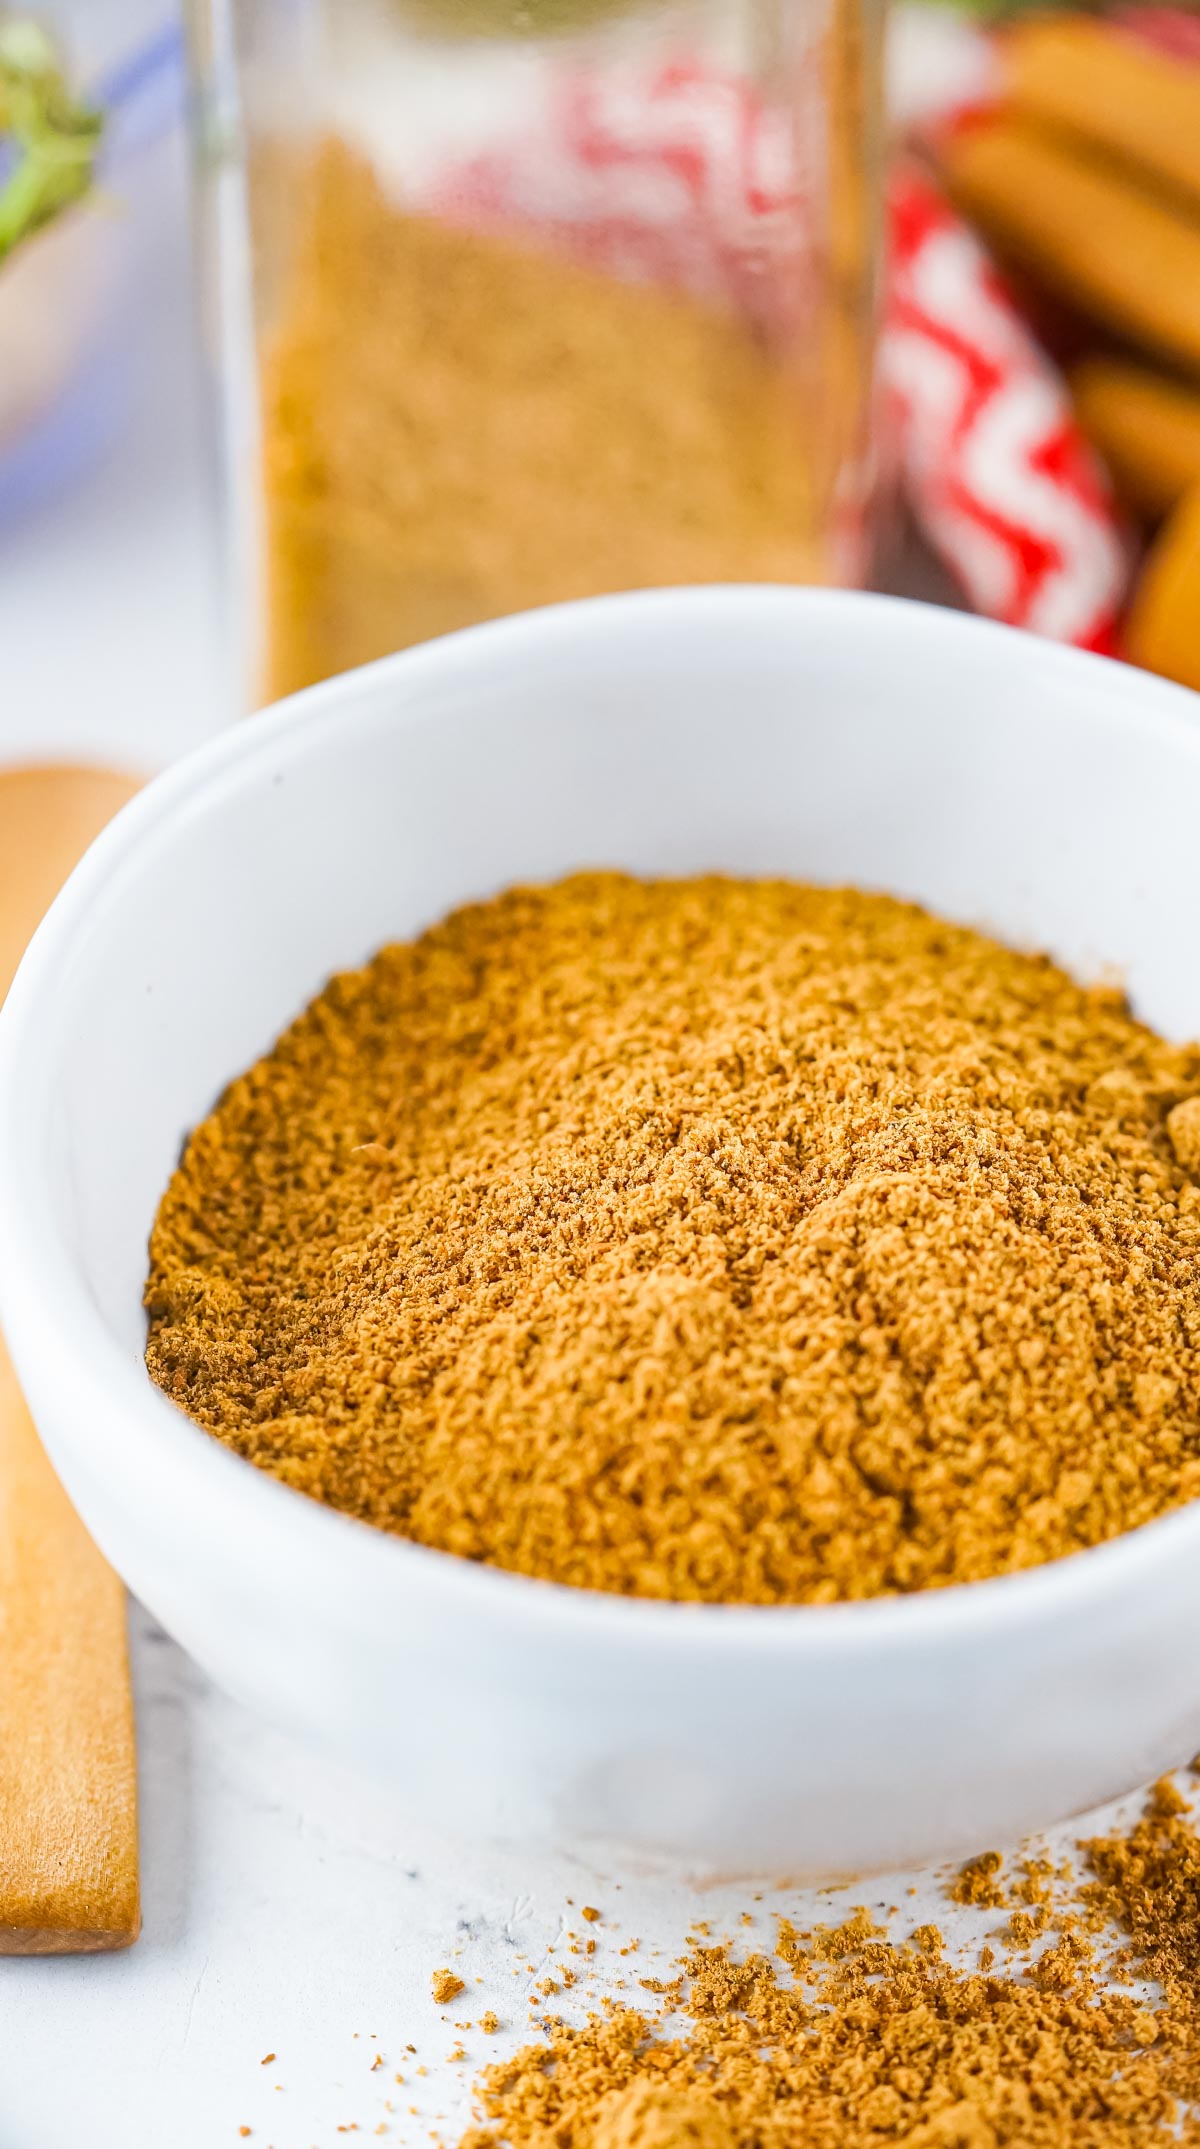 The spice mix in a white bowl.